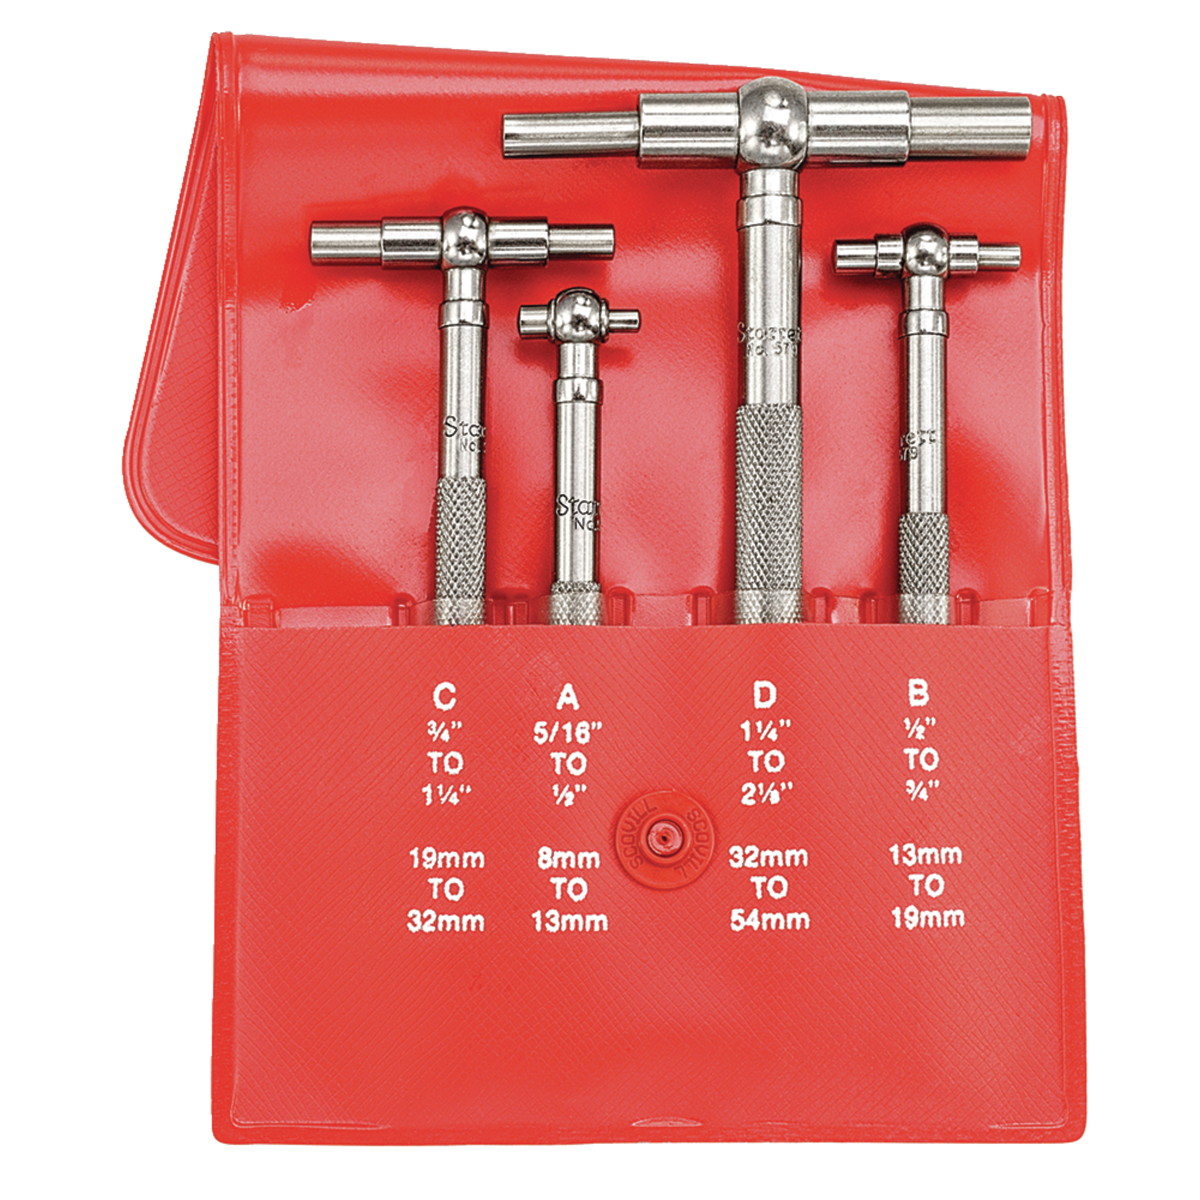 S579GZ Telescoping Gage Set with A-B-C-D in Case - Pack of 4 -  Starrett